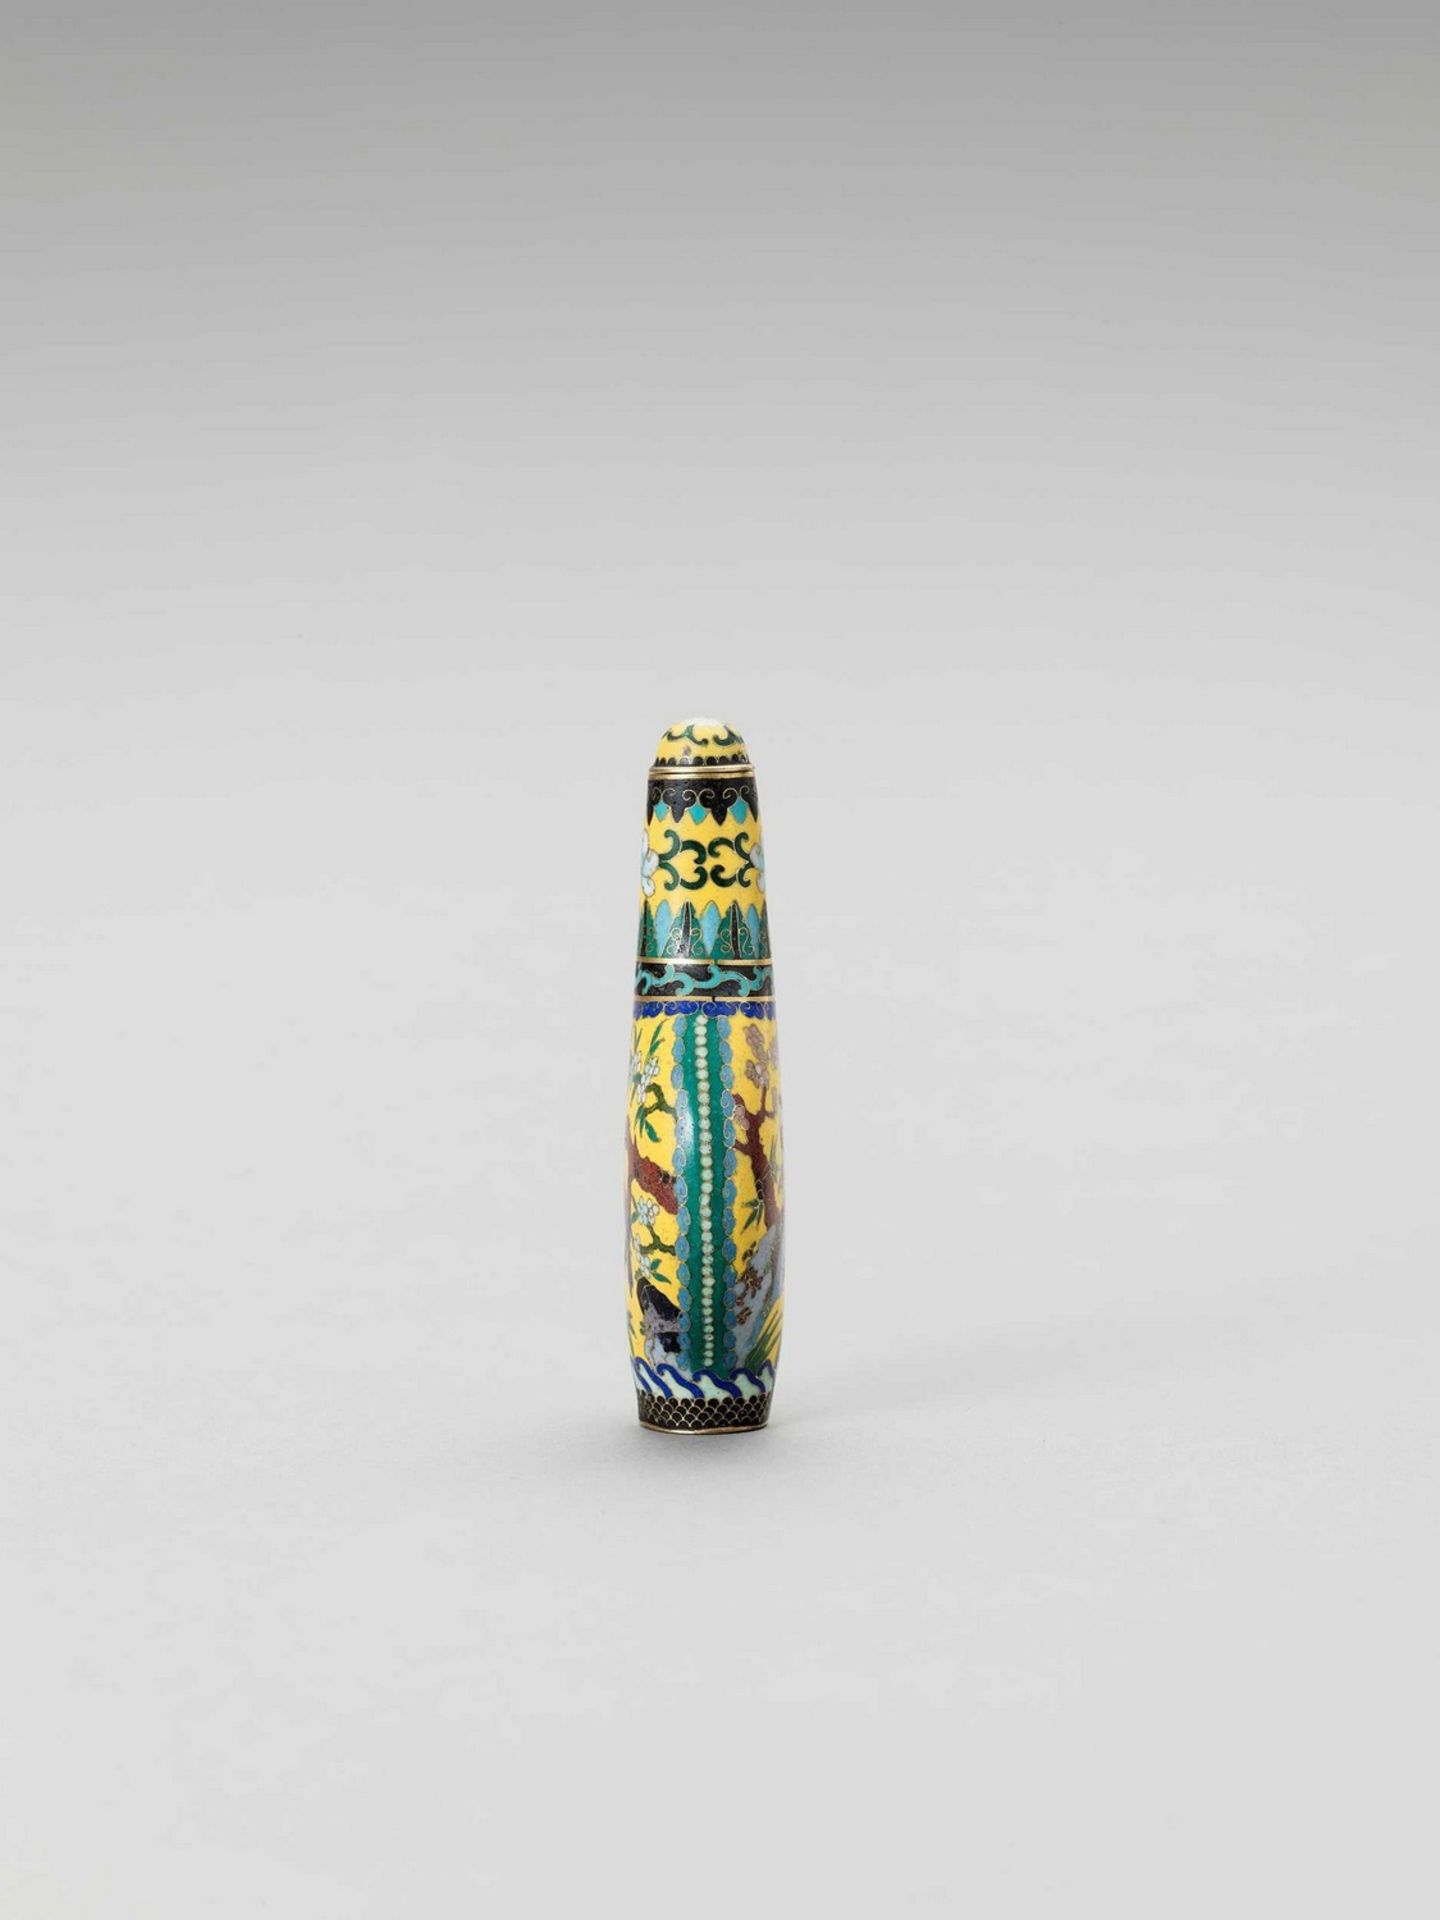 A CLOISONNE SNUFF BOTTLE WITH BIRDS - Image 2 of 7